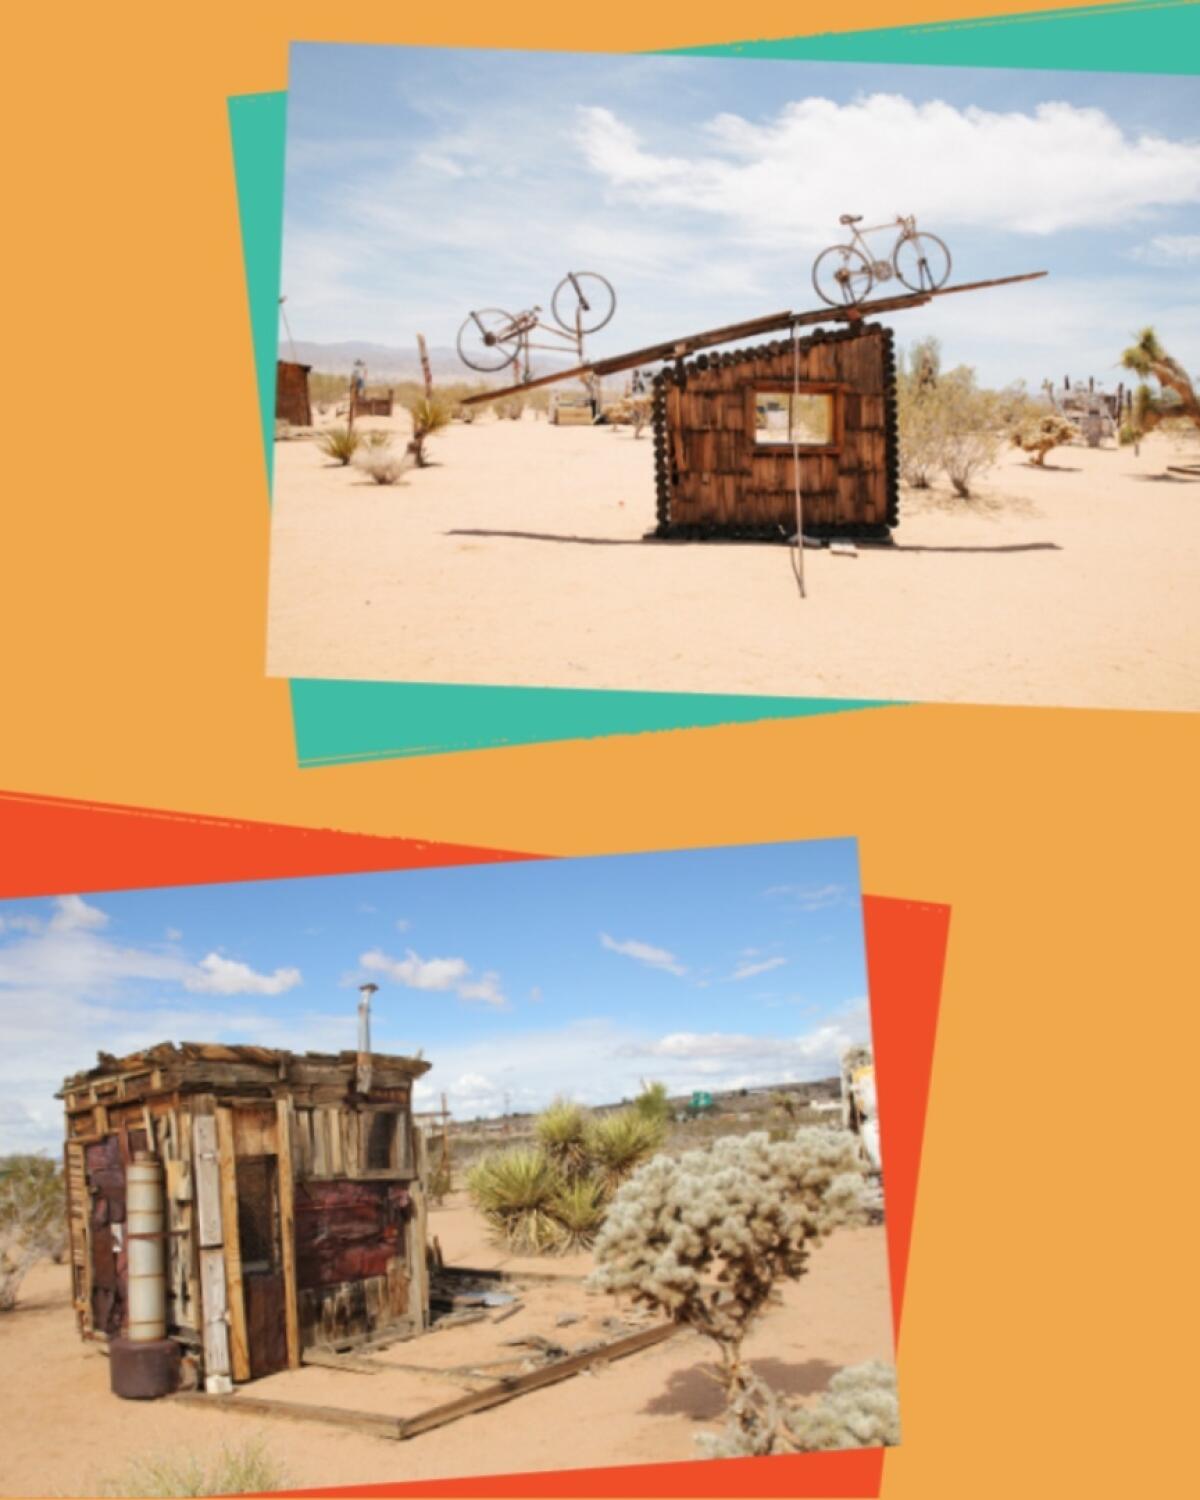 Noah Purifoy's free outdoor desert museum in Joshua Tree offers ample space to appreciate art at social distance.